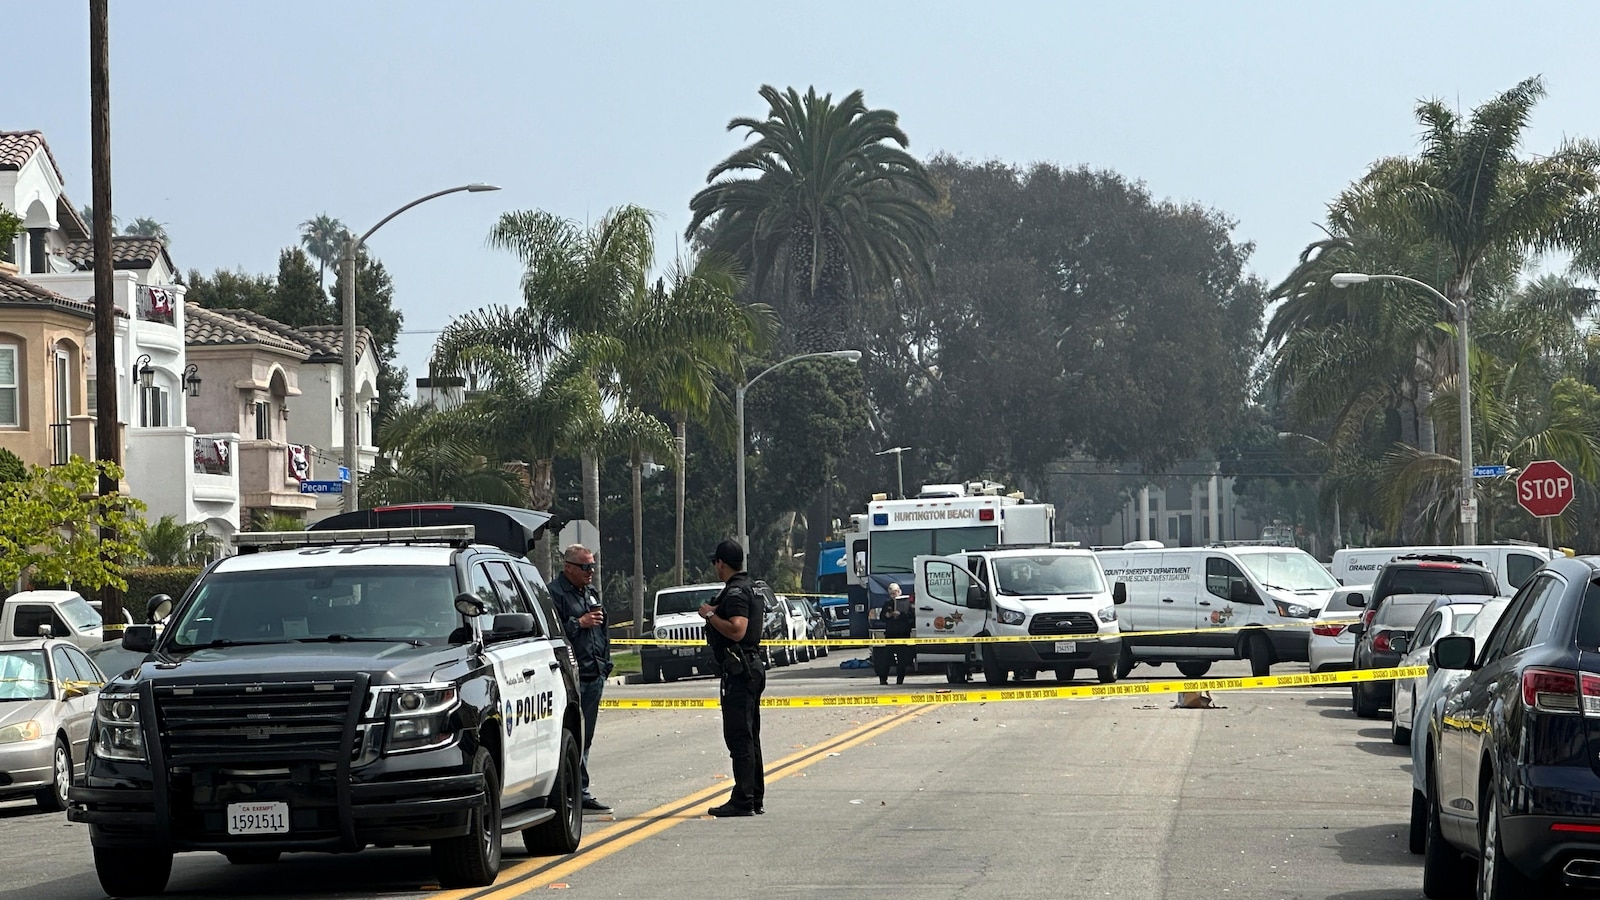 July Fourth attack in California beach city results in 2 deaths and 3 injuries